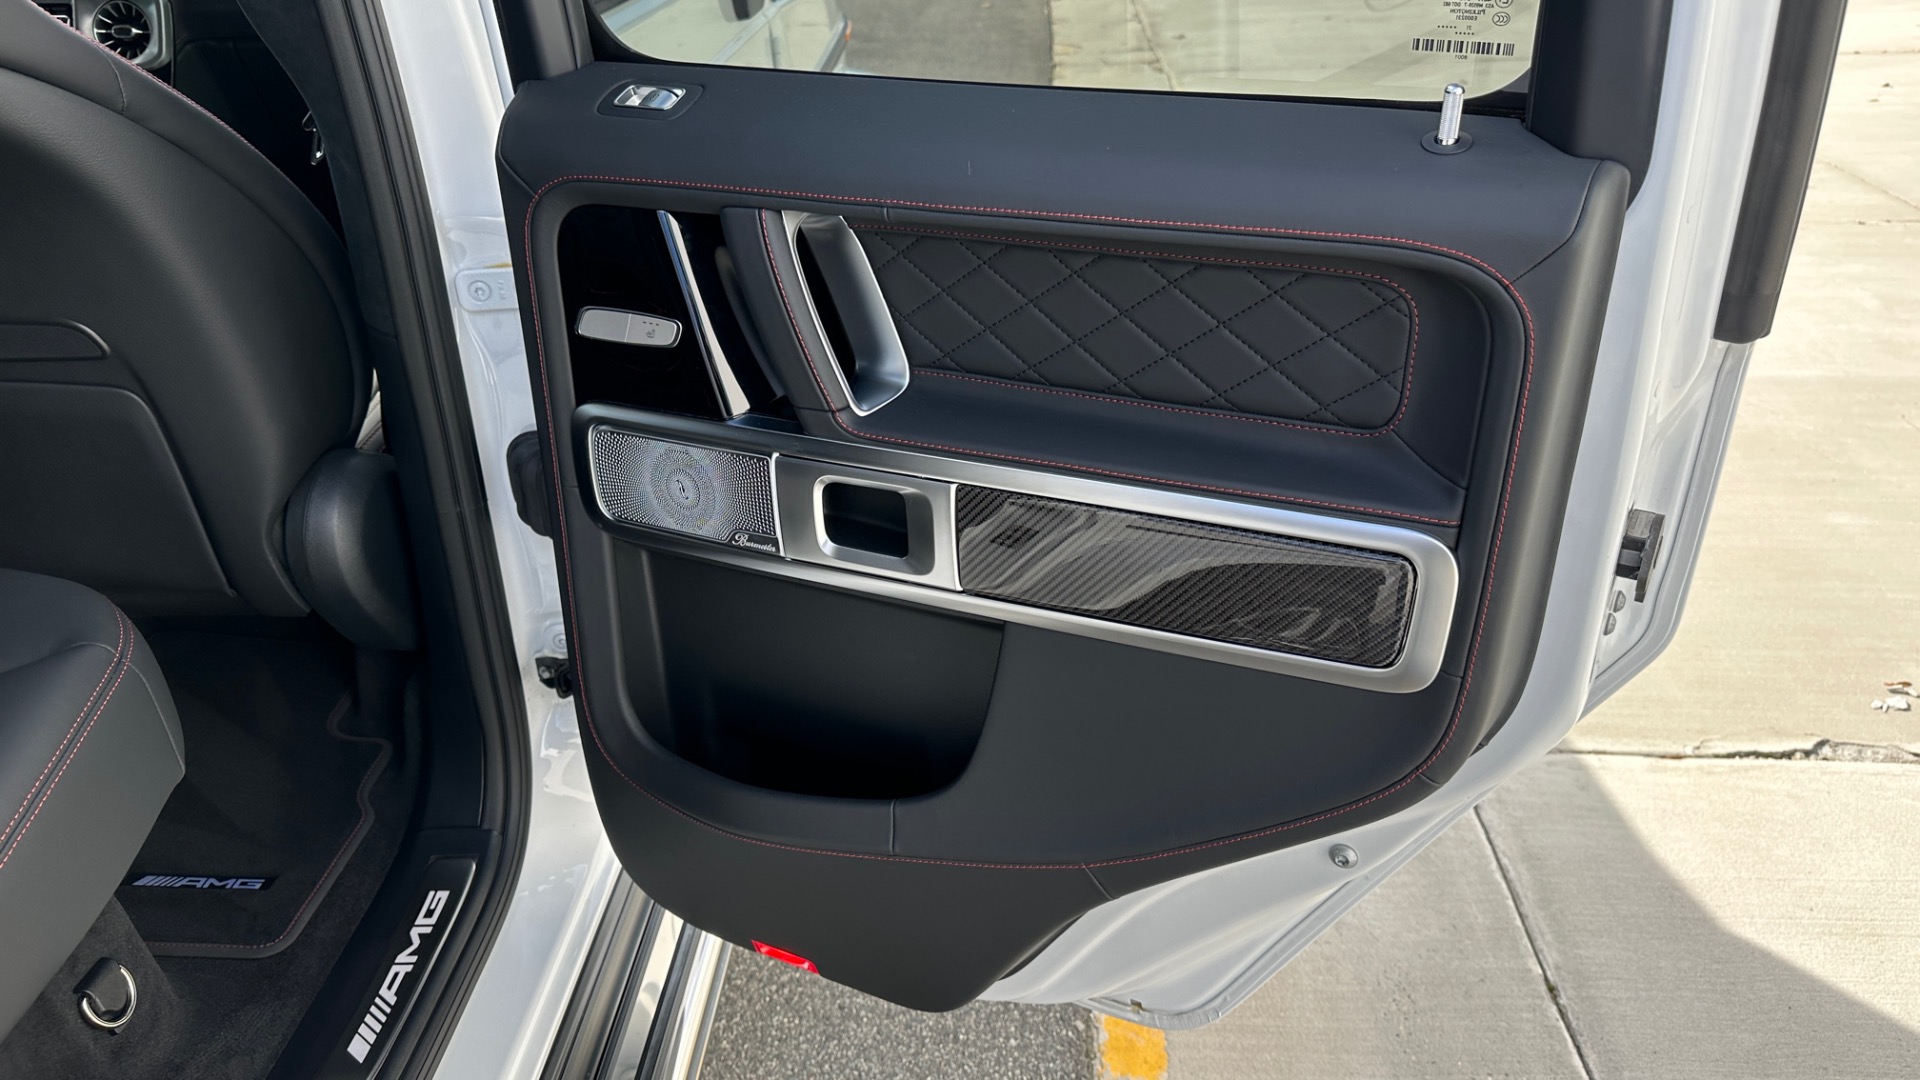 Used 2021 Mercedes-Benz G-Class AMG G63 / AMG EXCLUSIVE INTERIOR / CARBON FIBER / DIAMOND STITCH / 21IN AMG for sale $229,000 at Formula Imports in Charlotte NC 28227 25